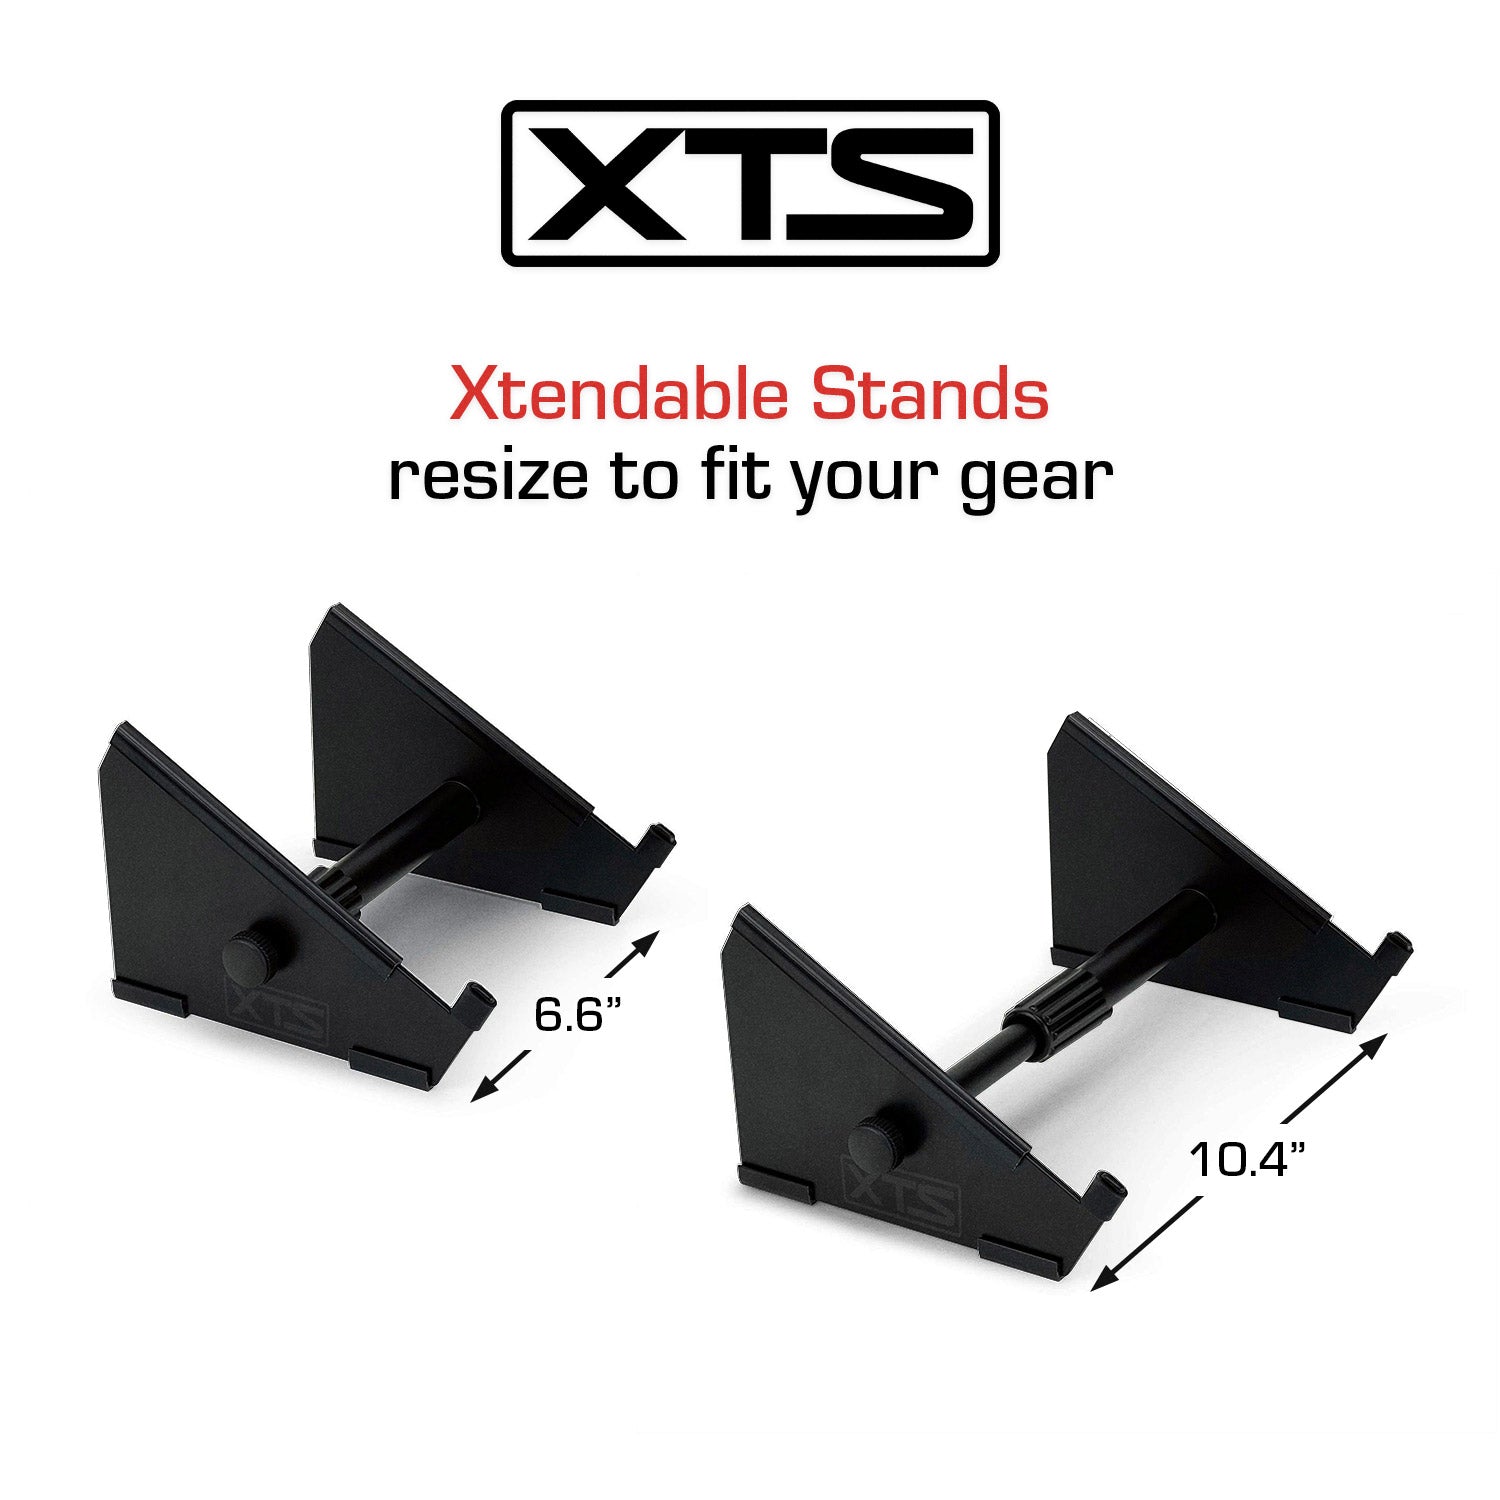 XTS Stand: Small